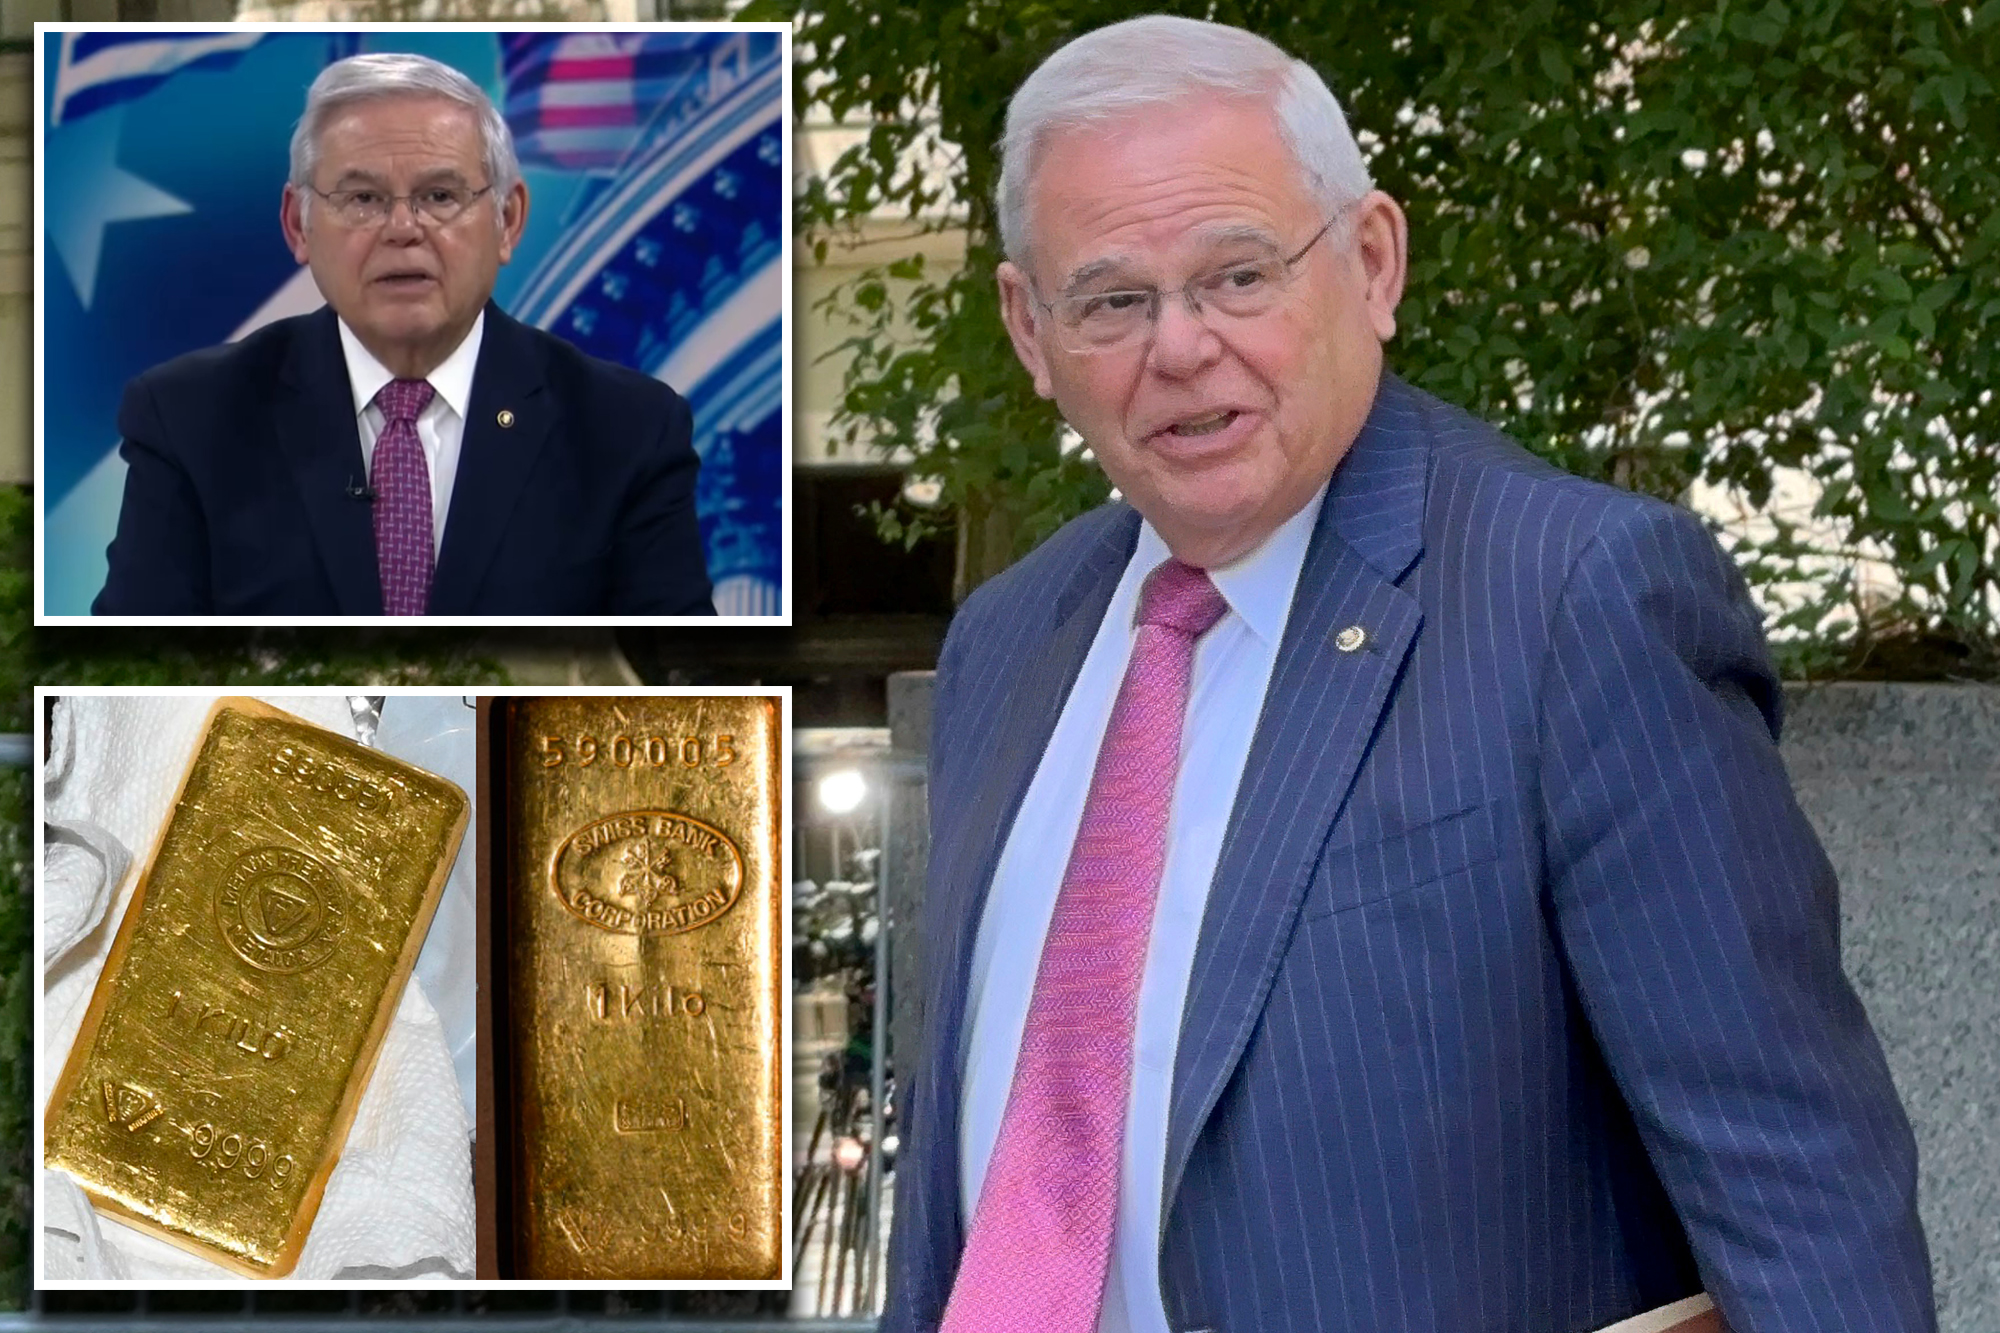 'Gold Bar Bob’ Menendez launches independent bid for re-election to New Jersey Senate seat